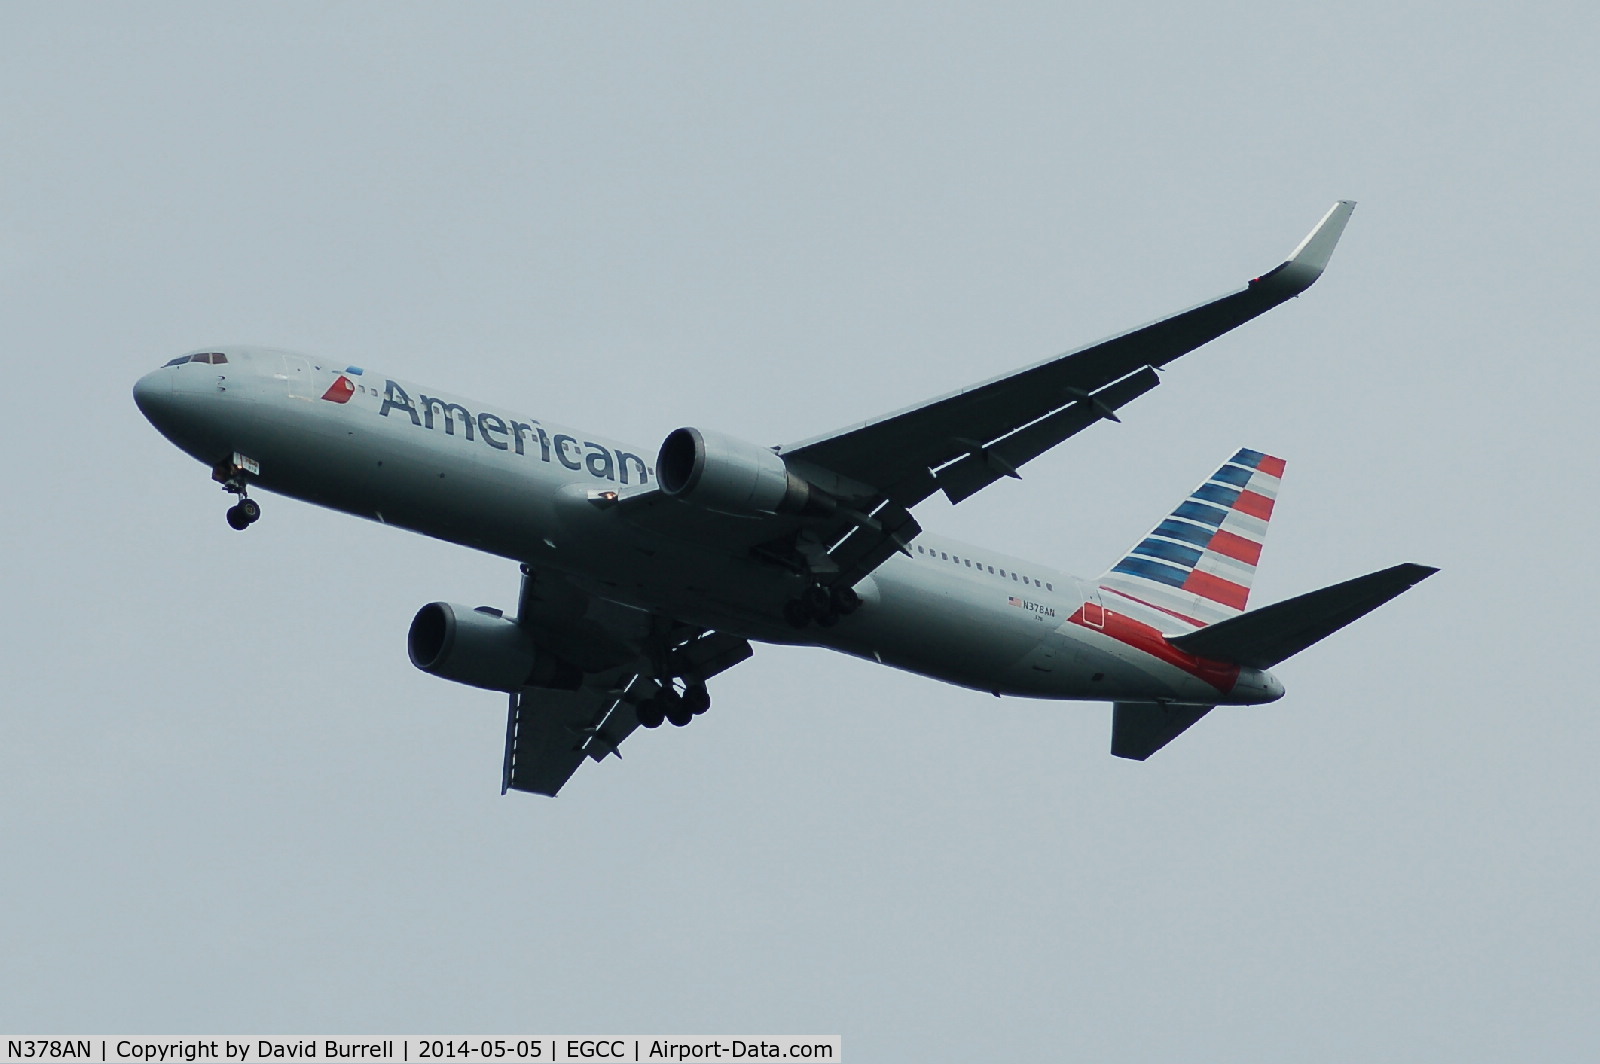 N378AN, 1992 Boeing 767-323/ER C/N 25447, American Airlines Boeing 767-323 on approach to Manchester Airport.